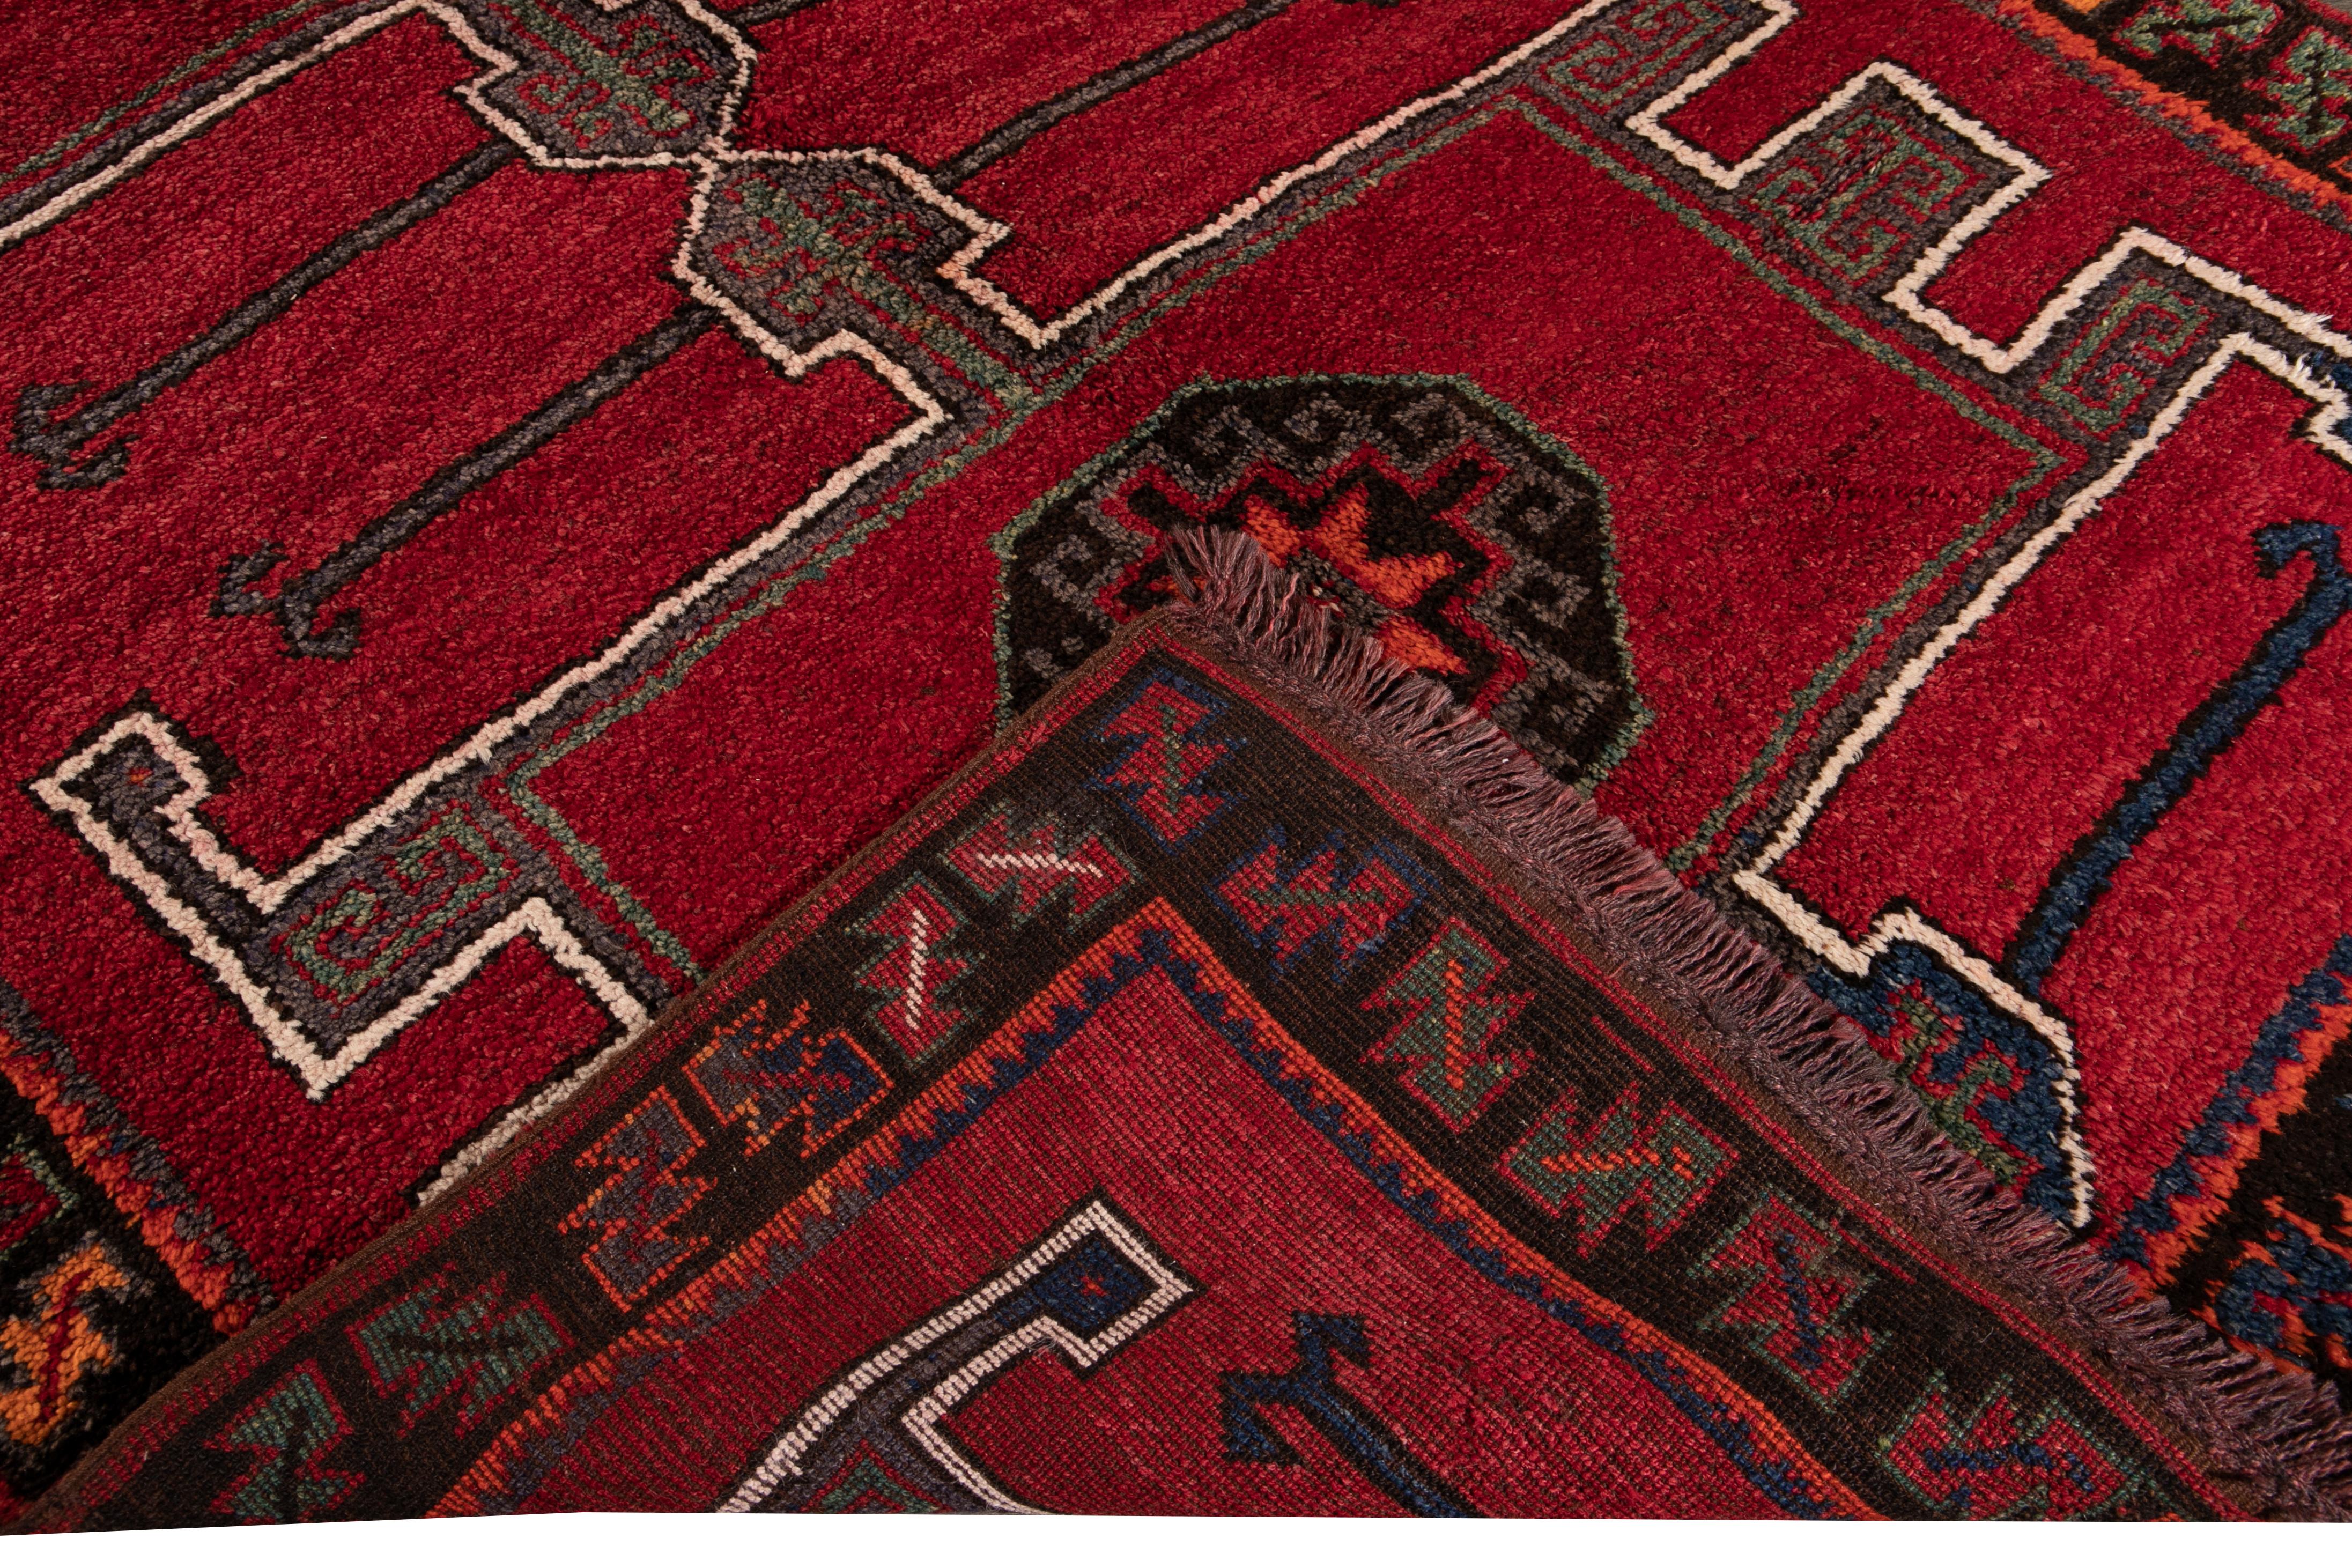 Beautiful vintage Turkish hand-knotted wool rug with a red field. This Turkish rug has a brown frame and navy-blue, orange, white, and gray accents in a gorgeous all-over geometric Tribal design.

This rug measures: 6'1